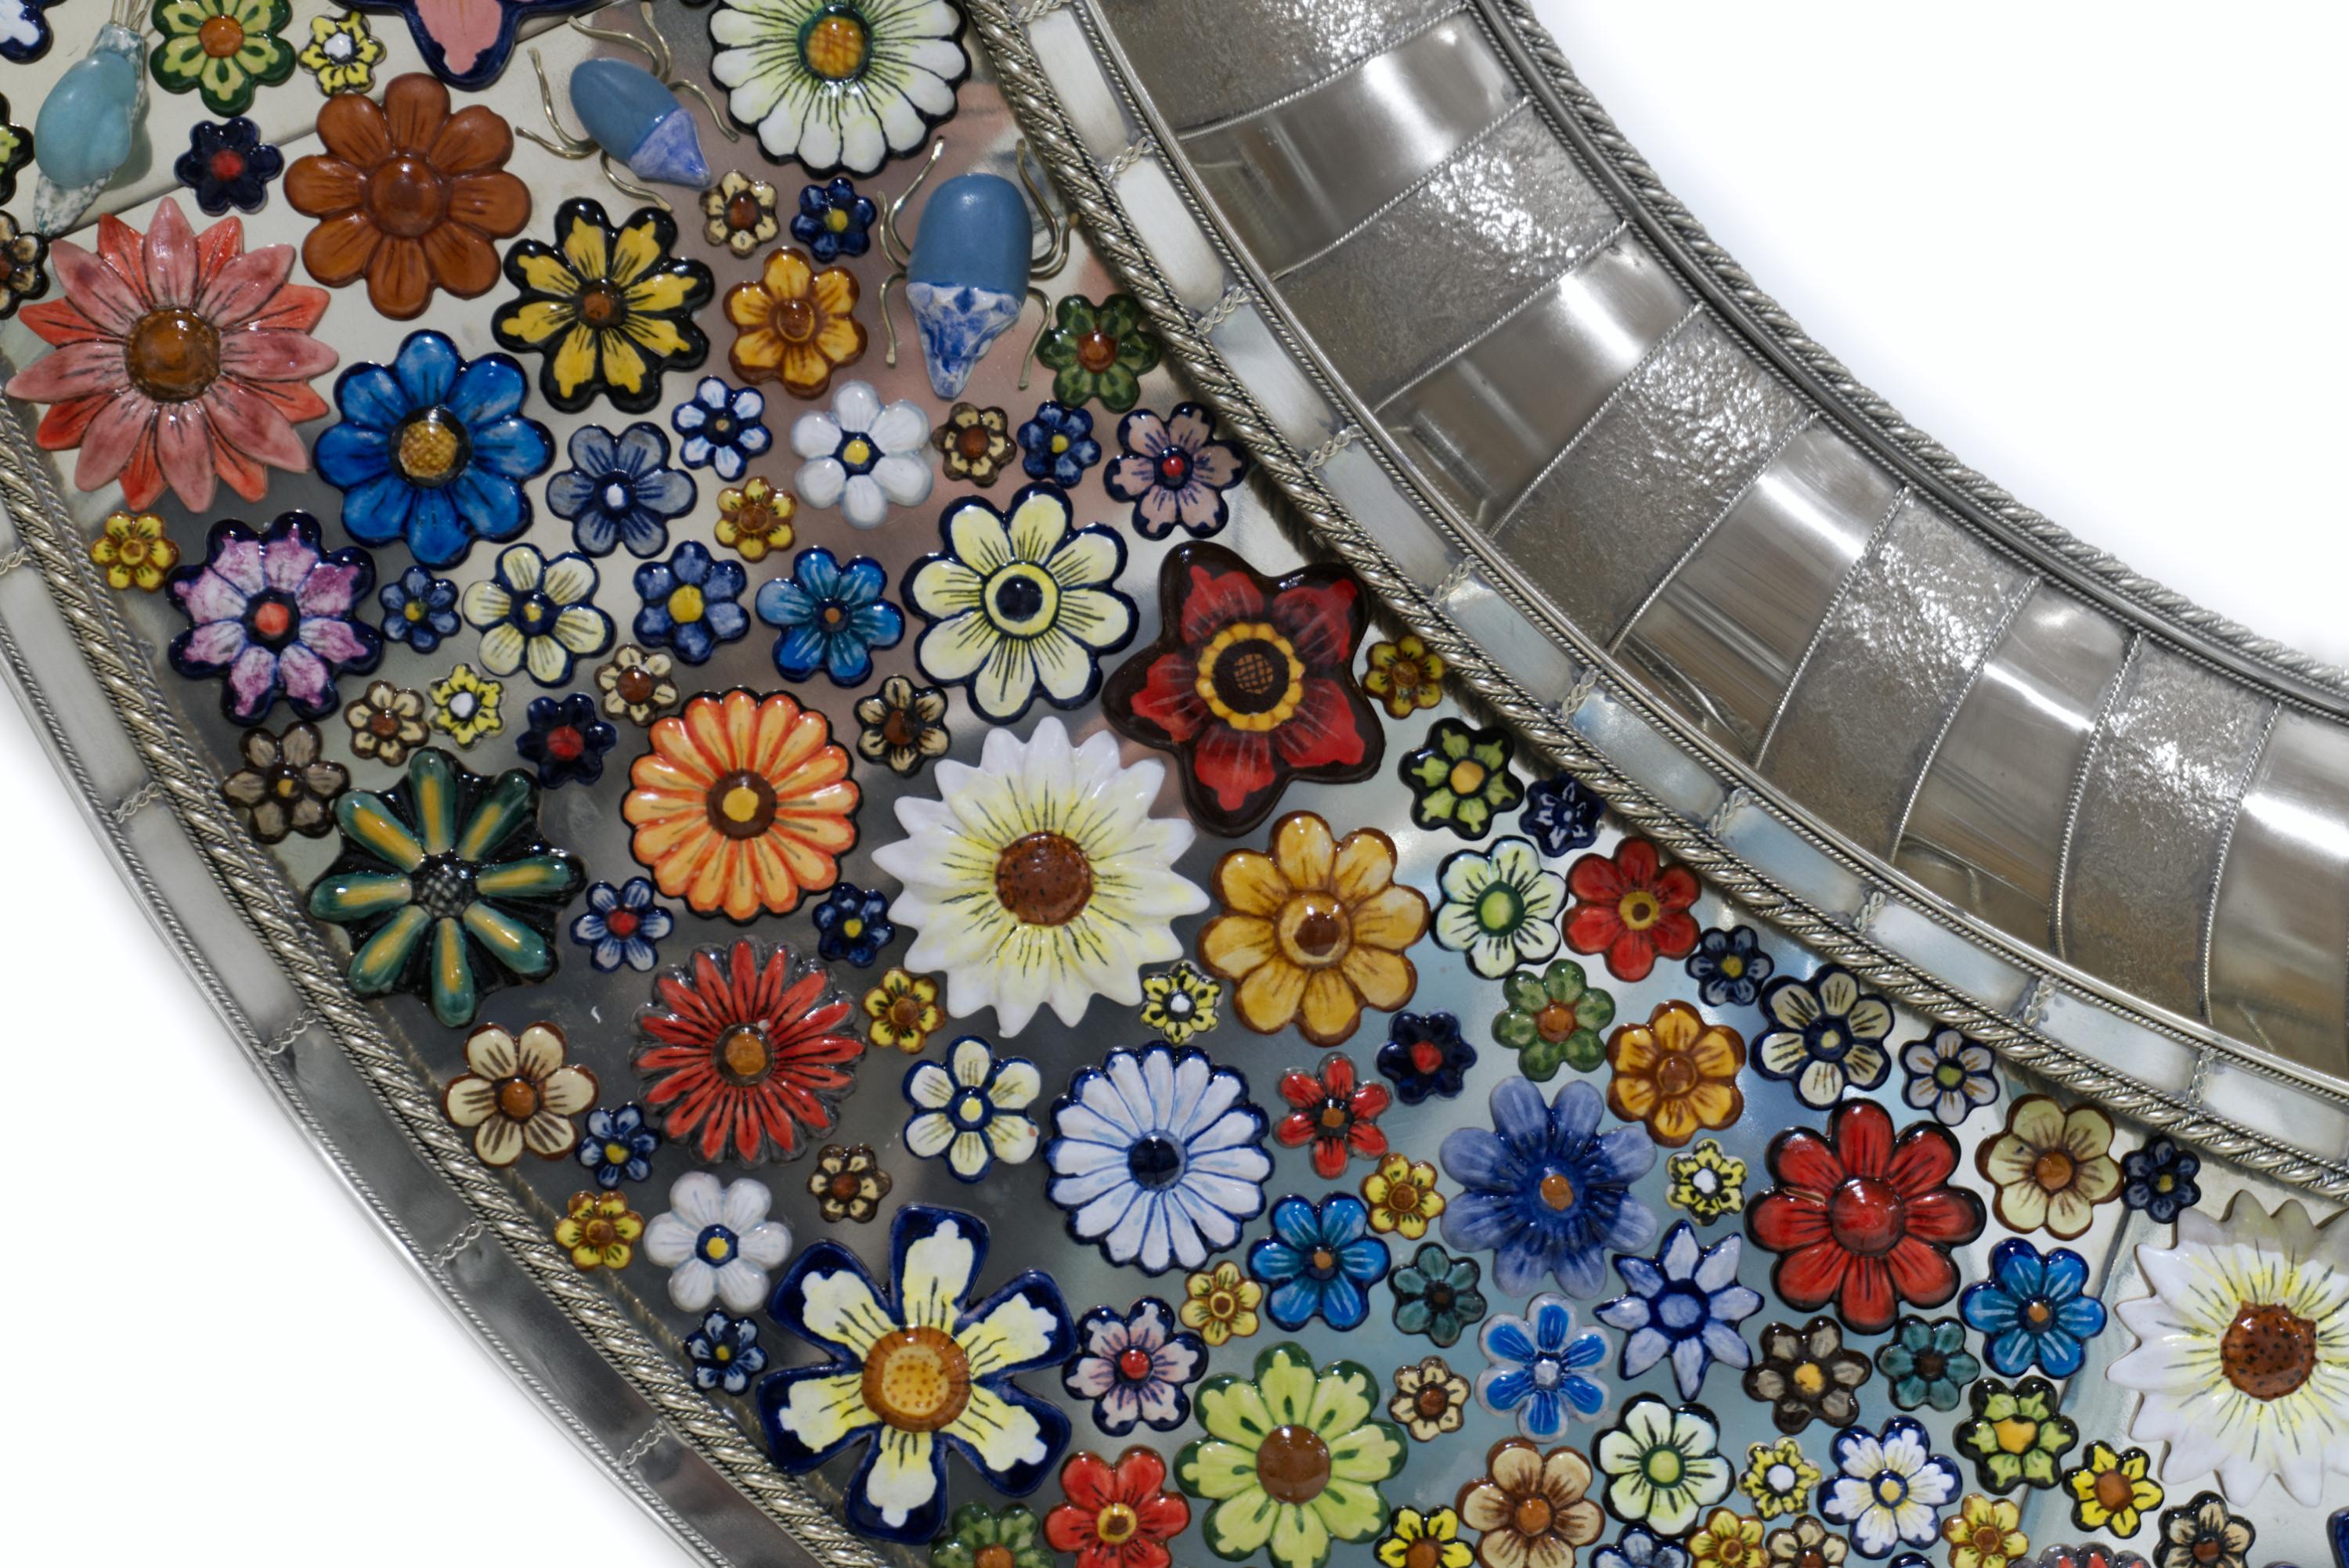 Contemporary Roundy Convex Mirror, Hand Painted Ceramic Flowers and Insects over White Metal